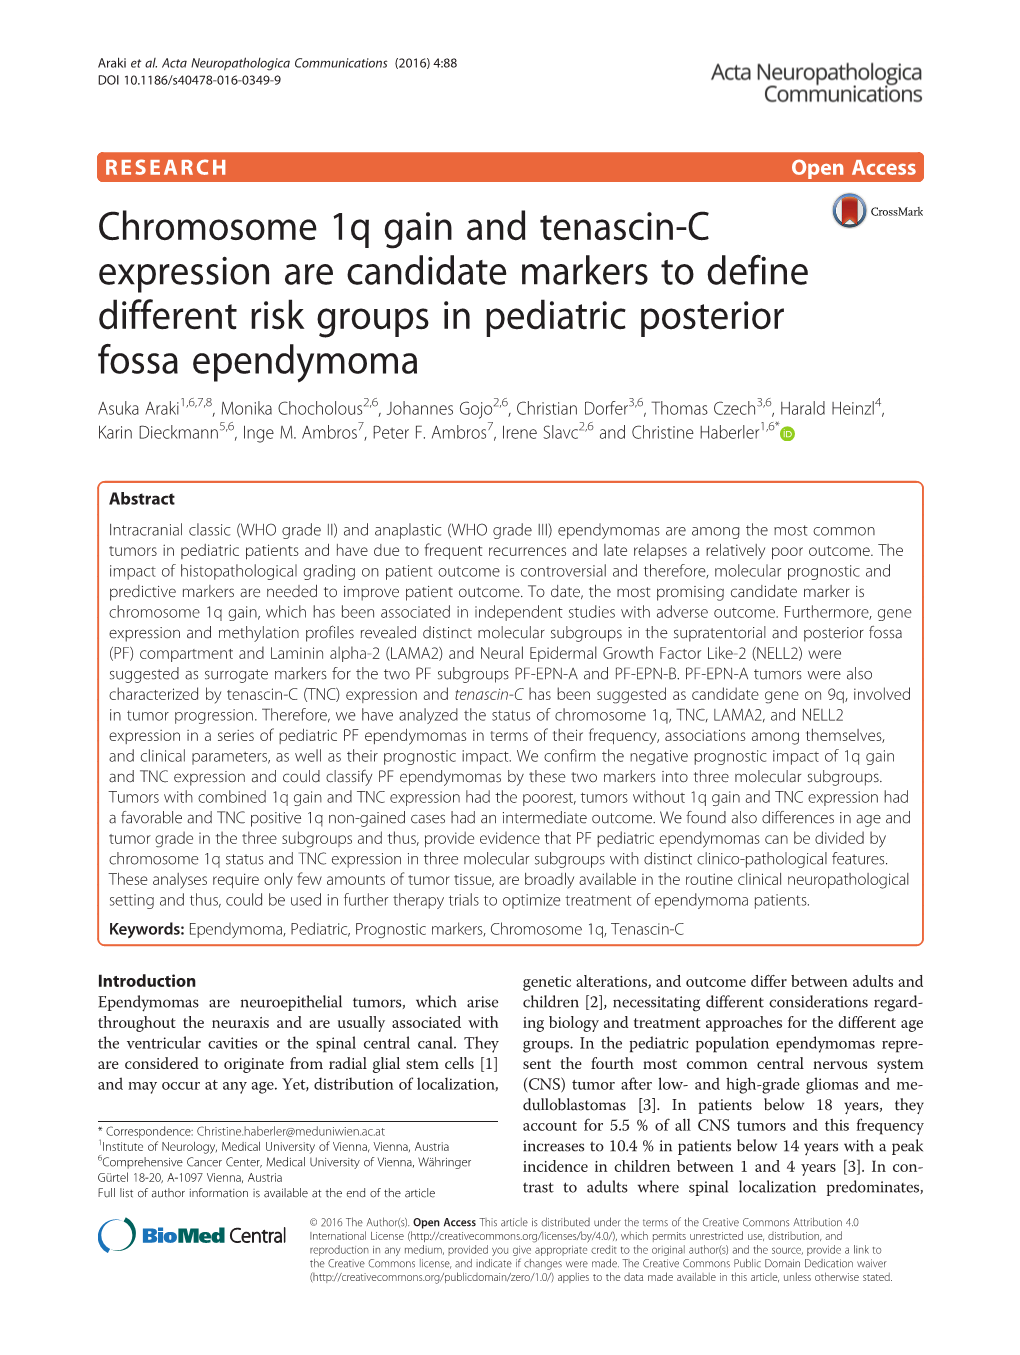 Chromosome 1Q Gain and Tenascin-C Expression Are Candidate Markers